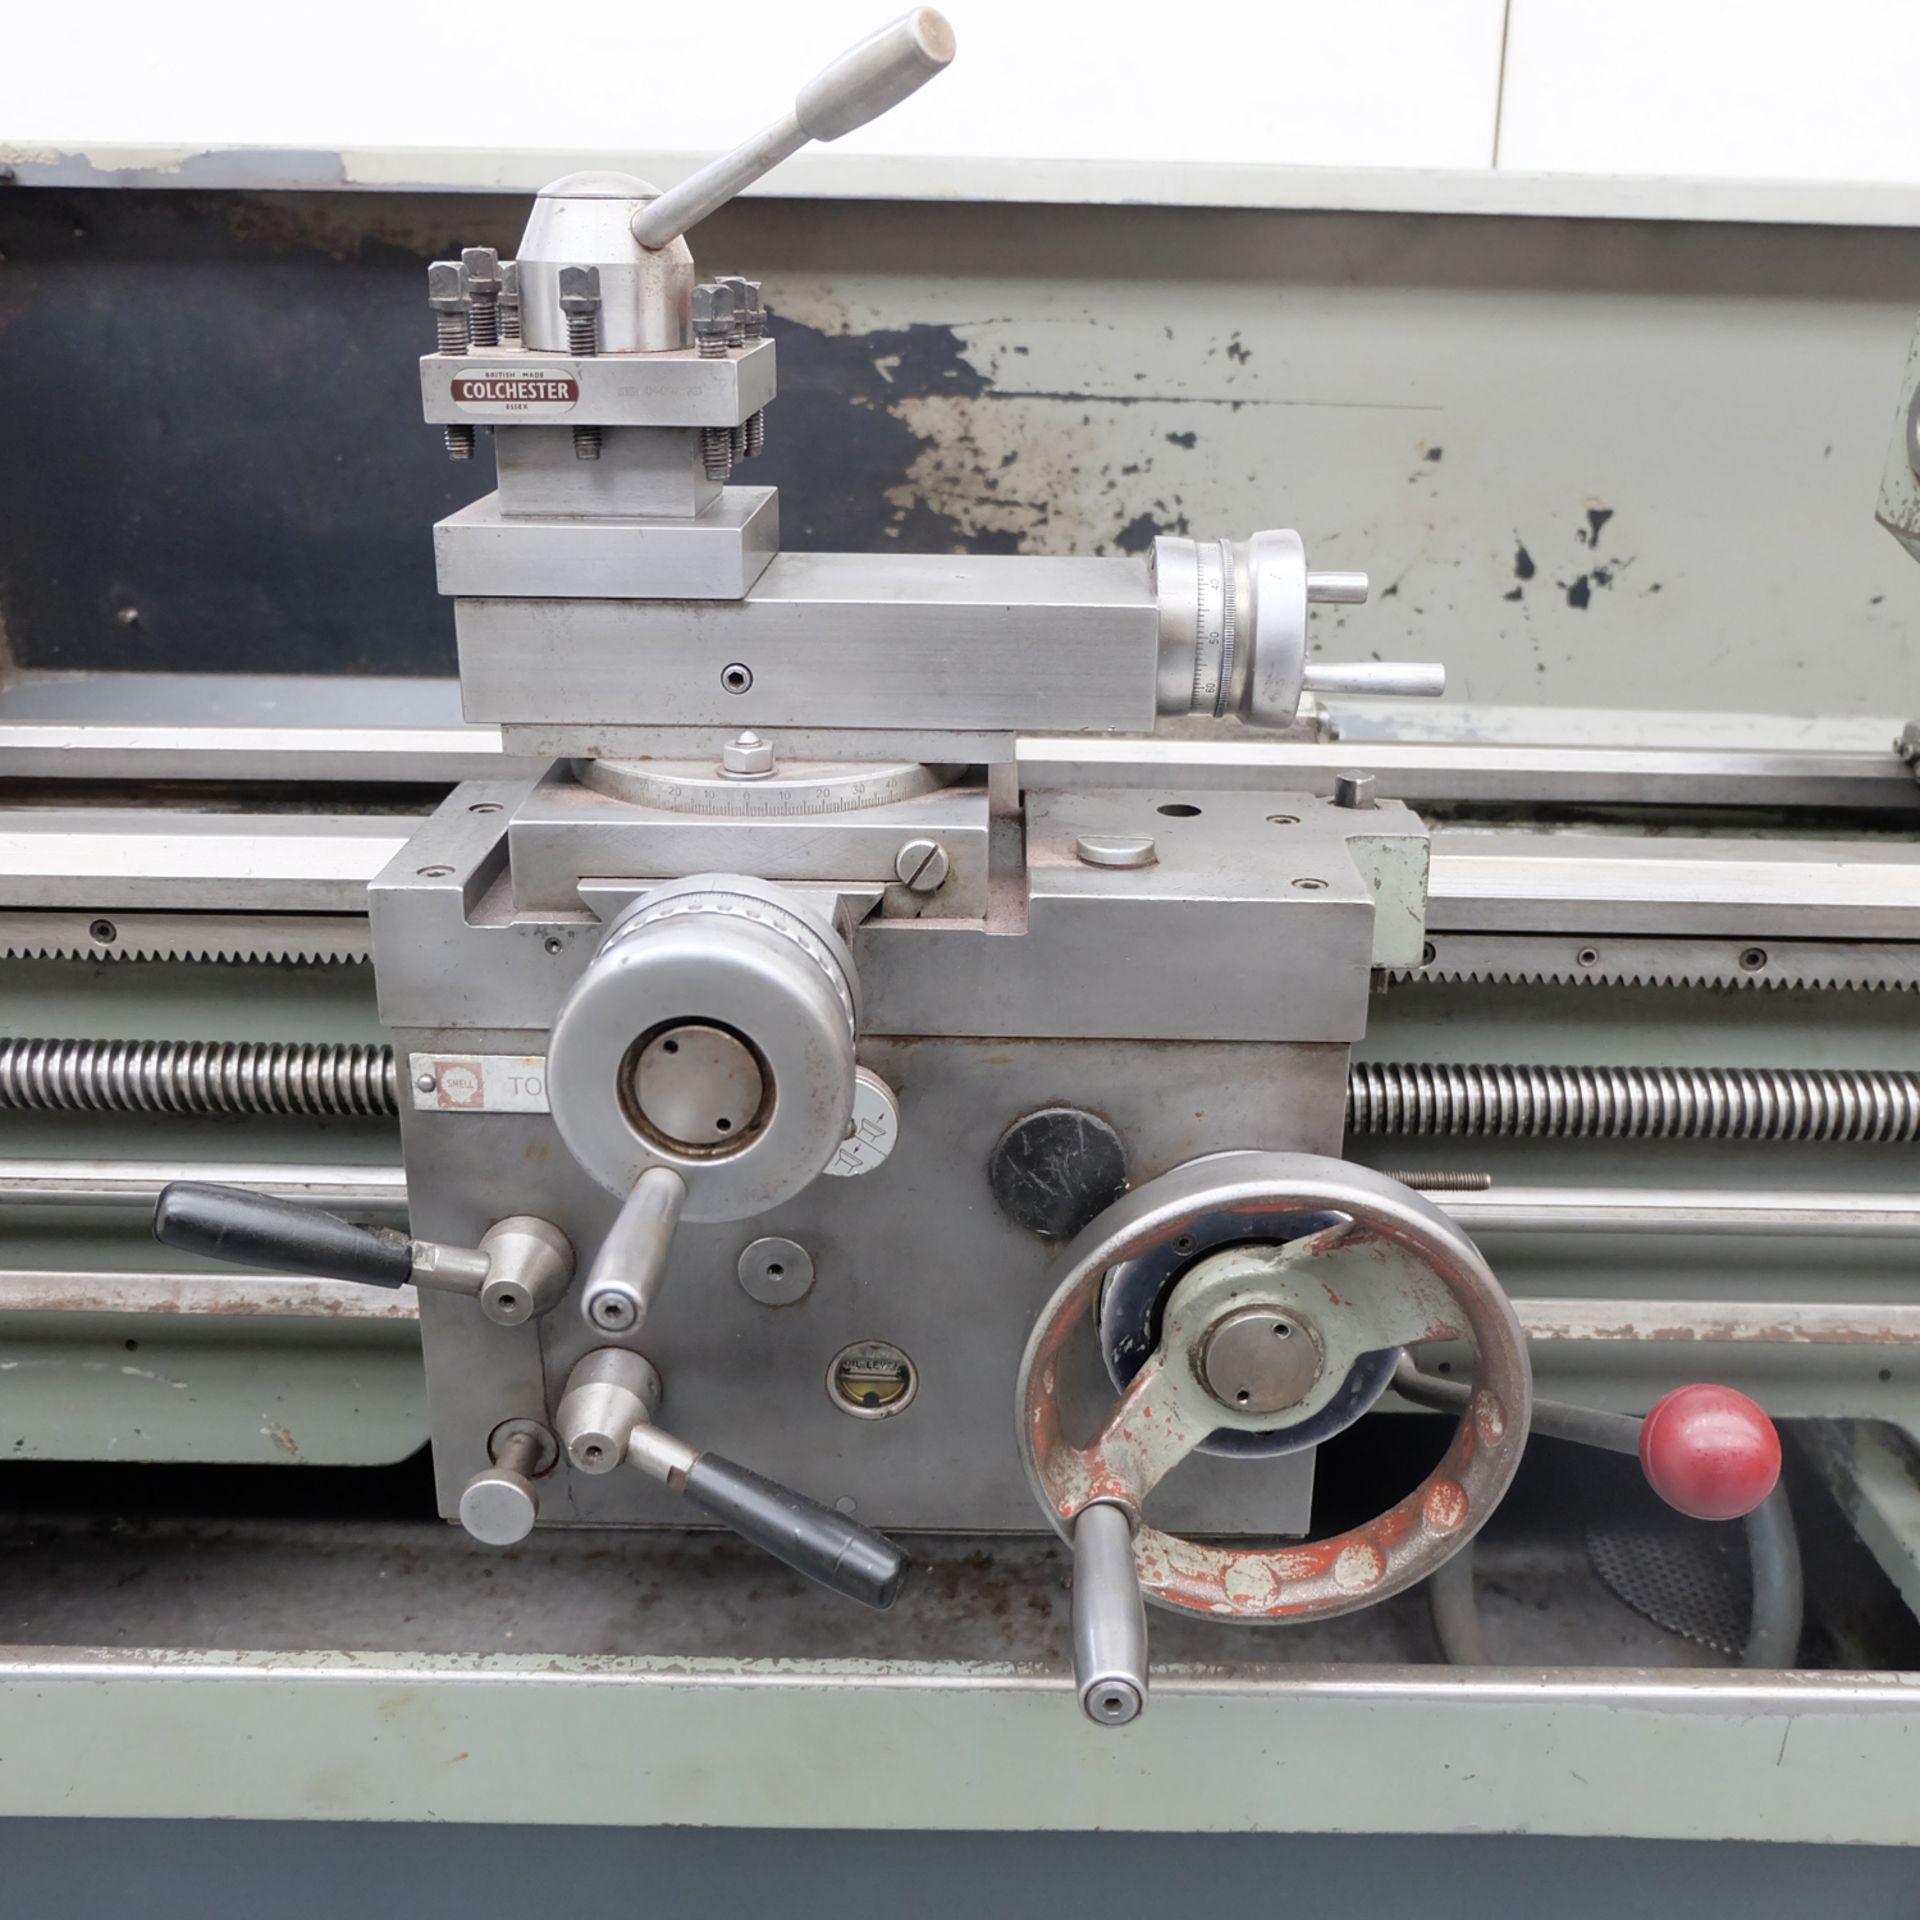 Colchester Master 2500 Gap Bed Centre Lathe. Height of Centres 6 1/2". Swing Over Bed 13 1/4". - Image 9 of 10